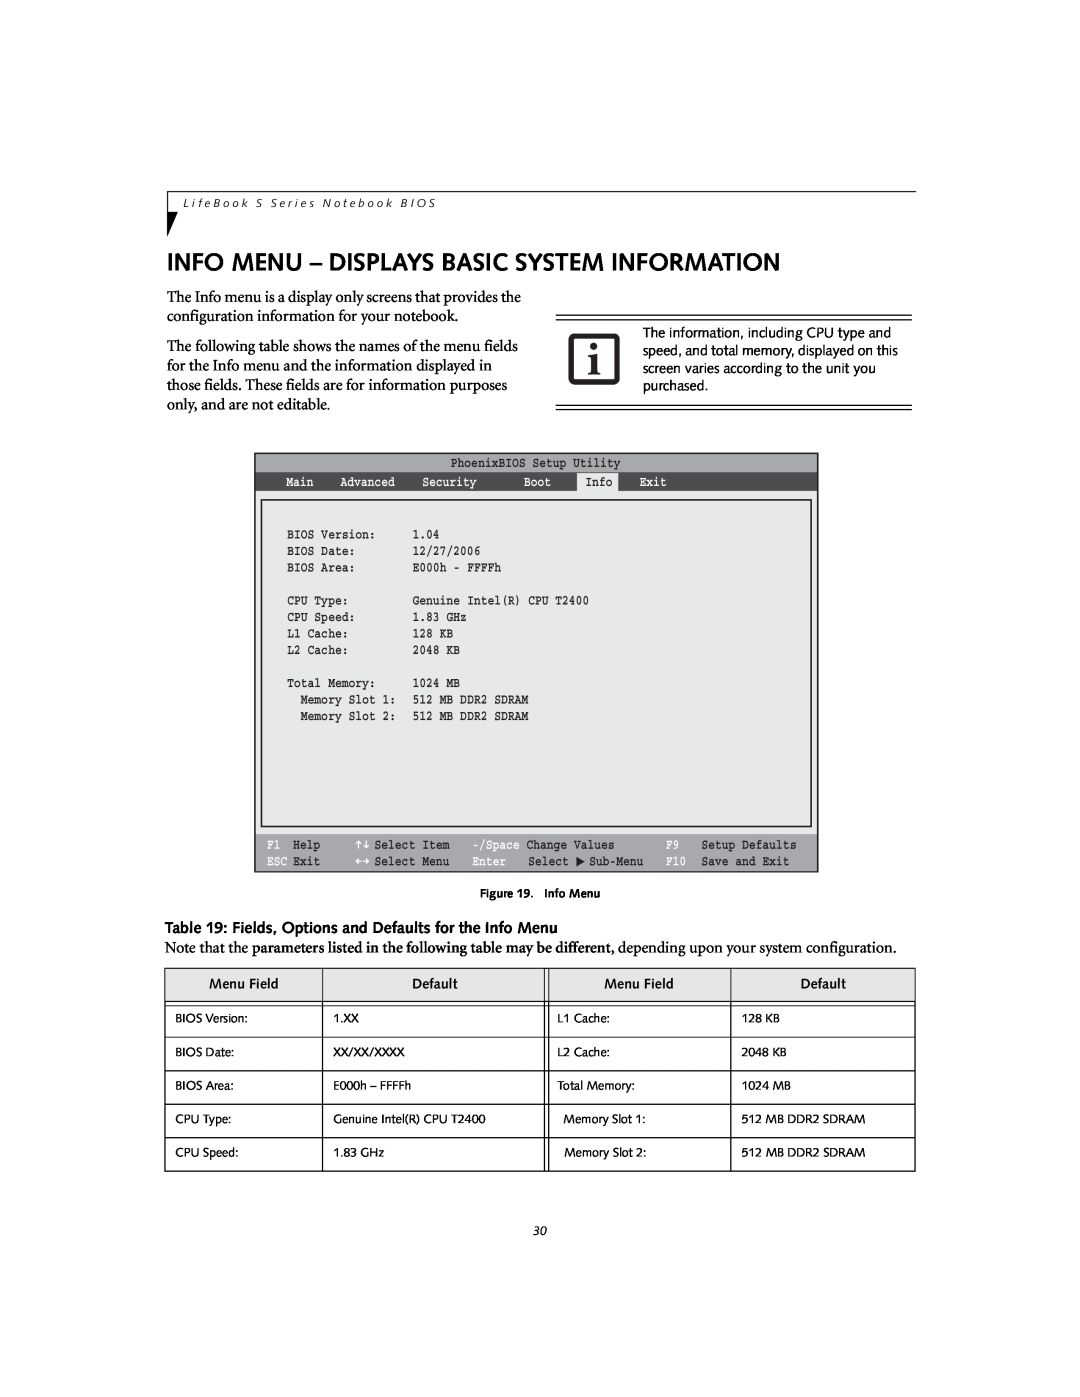 Fujitsu S7110 manual Info Menu - Displays Basic System Information, Fields, Options and Defaults for the Info Menu 